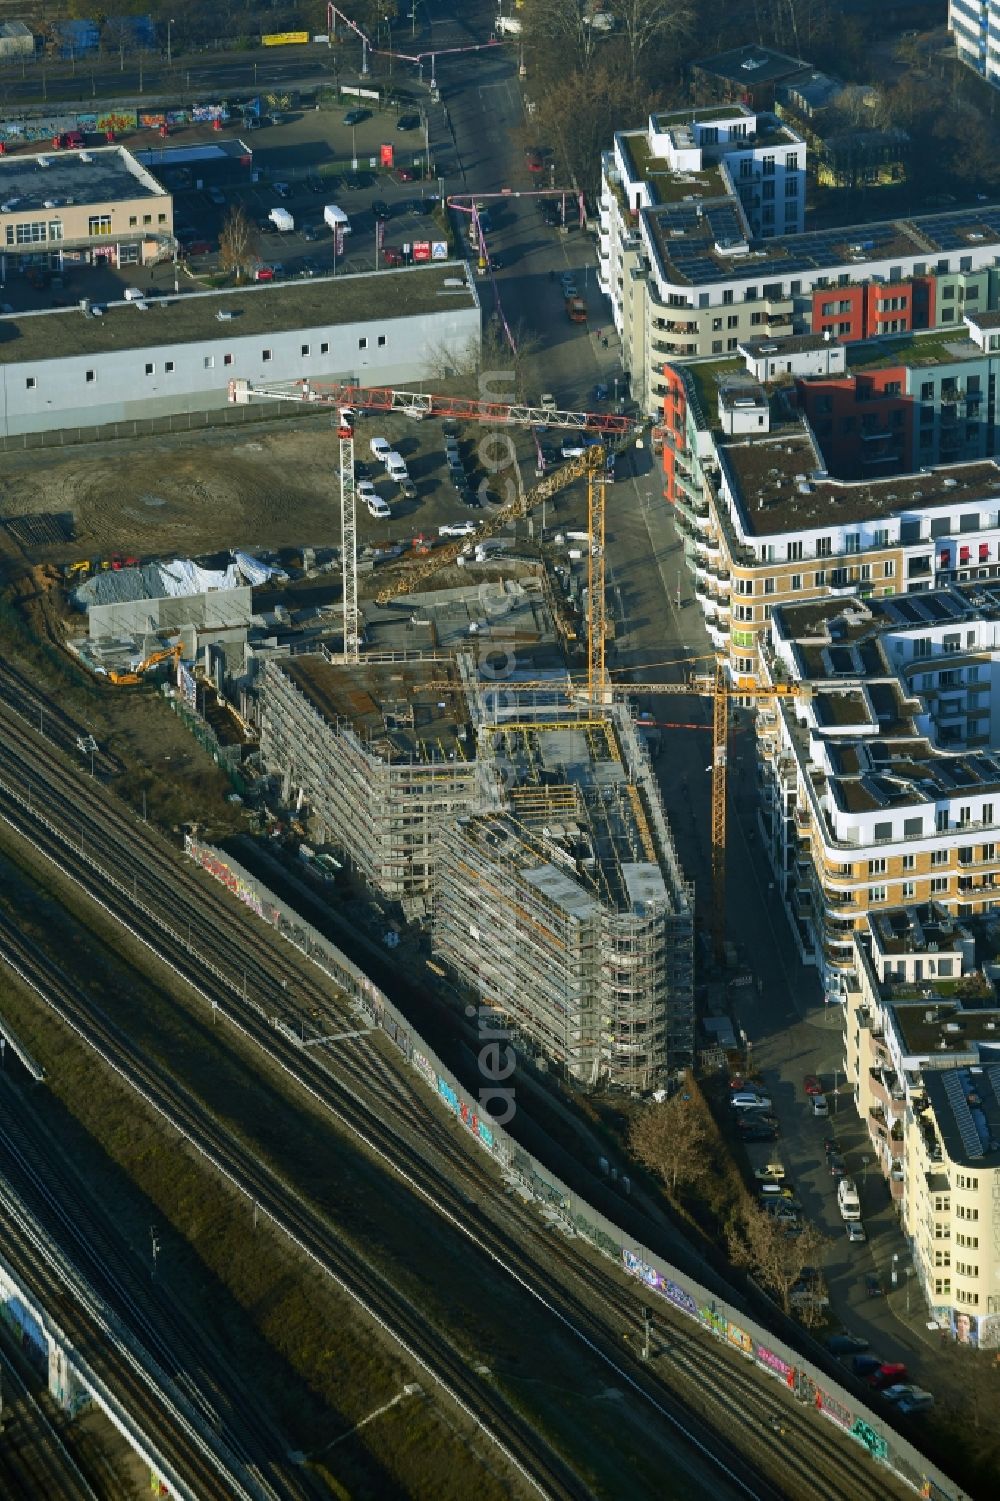 Berlin from the bird's eye view: Construction site for the multi-family residential building Revaler Spitze on Revaler Strasse in the district Friedrichshain in Berlin, Germany